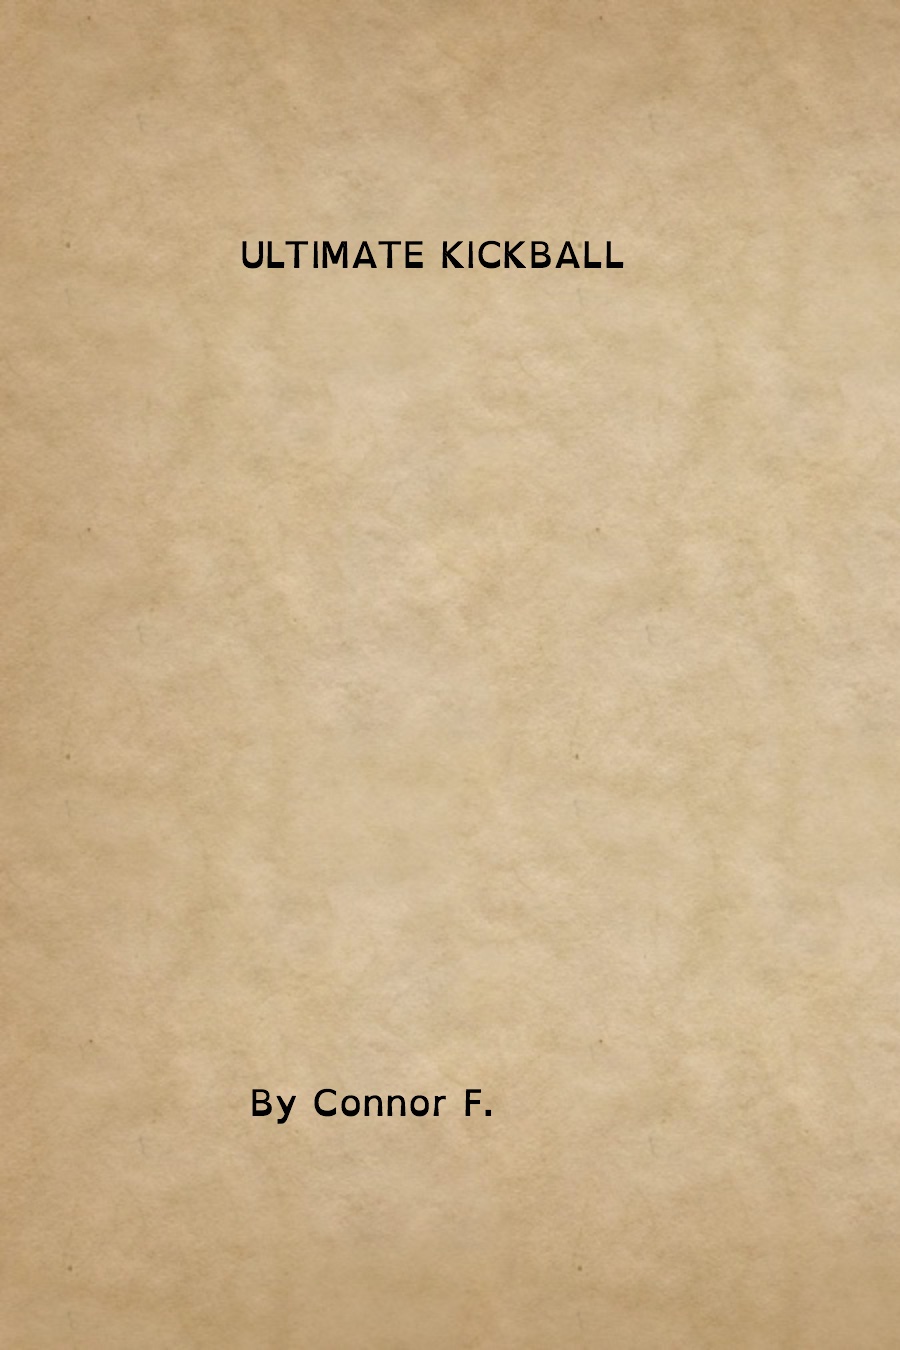 Ultimate Kickball by Connor F